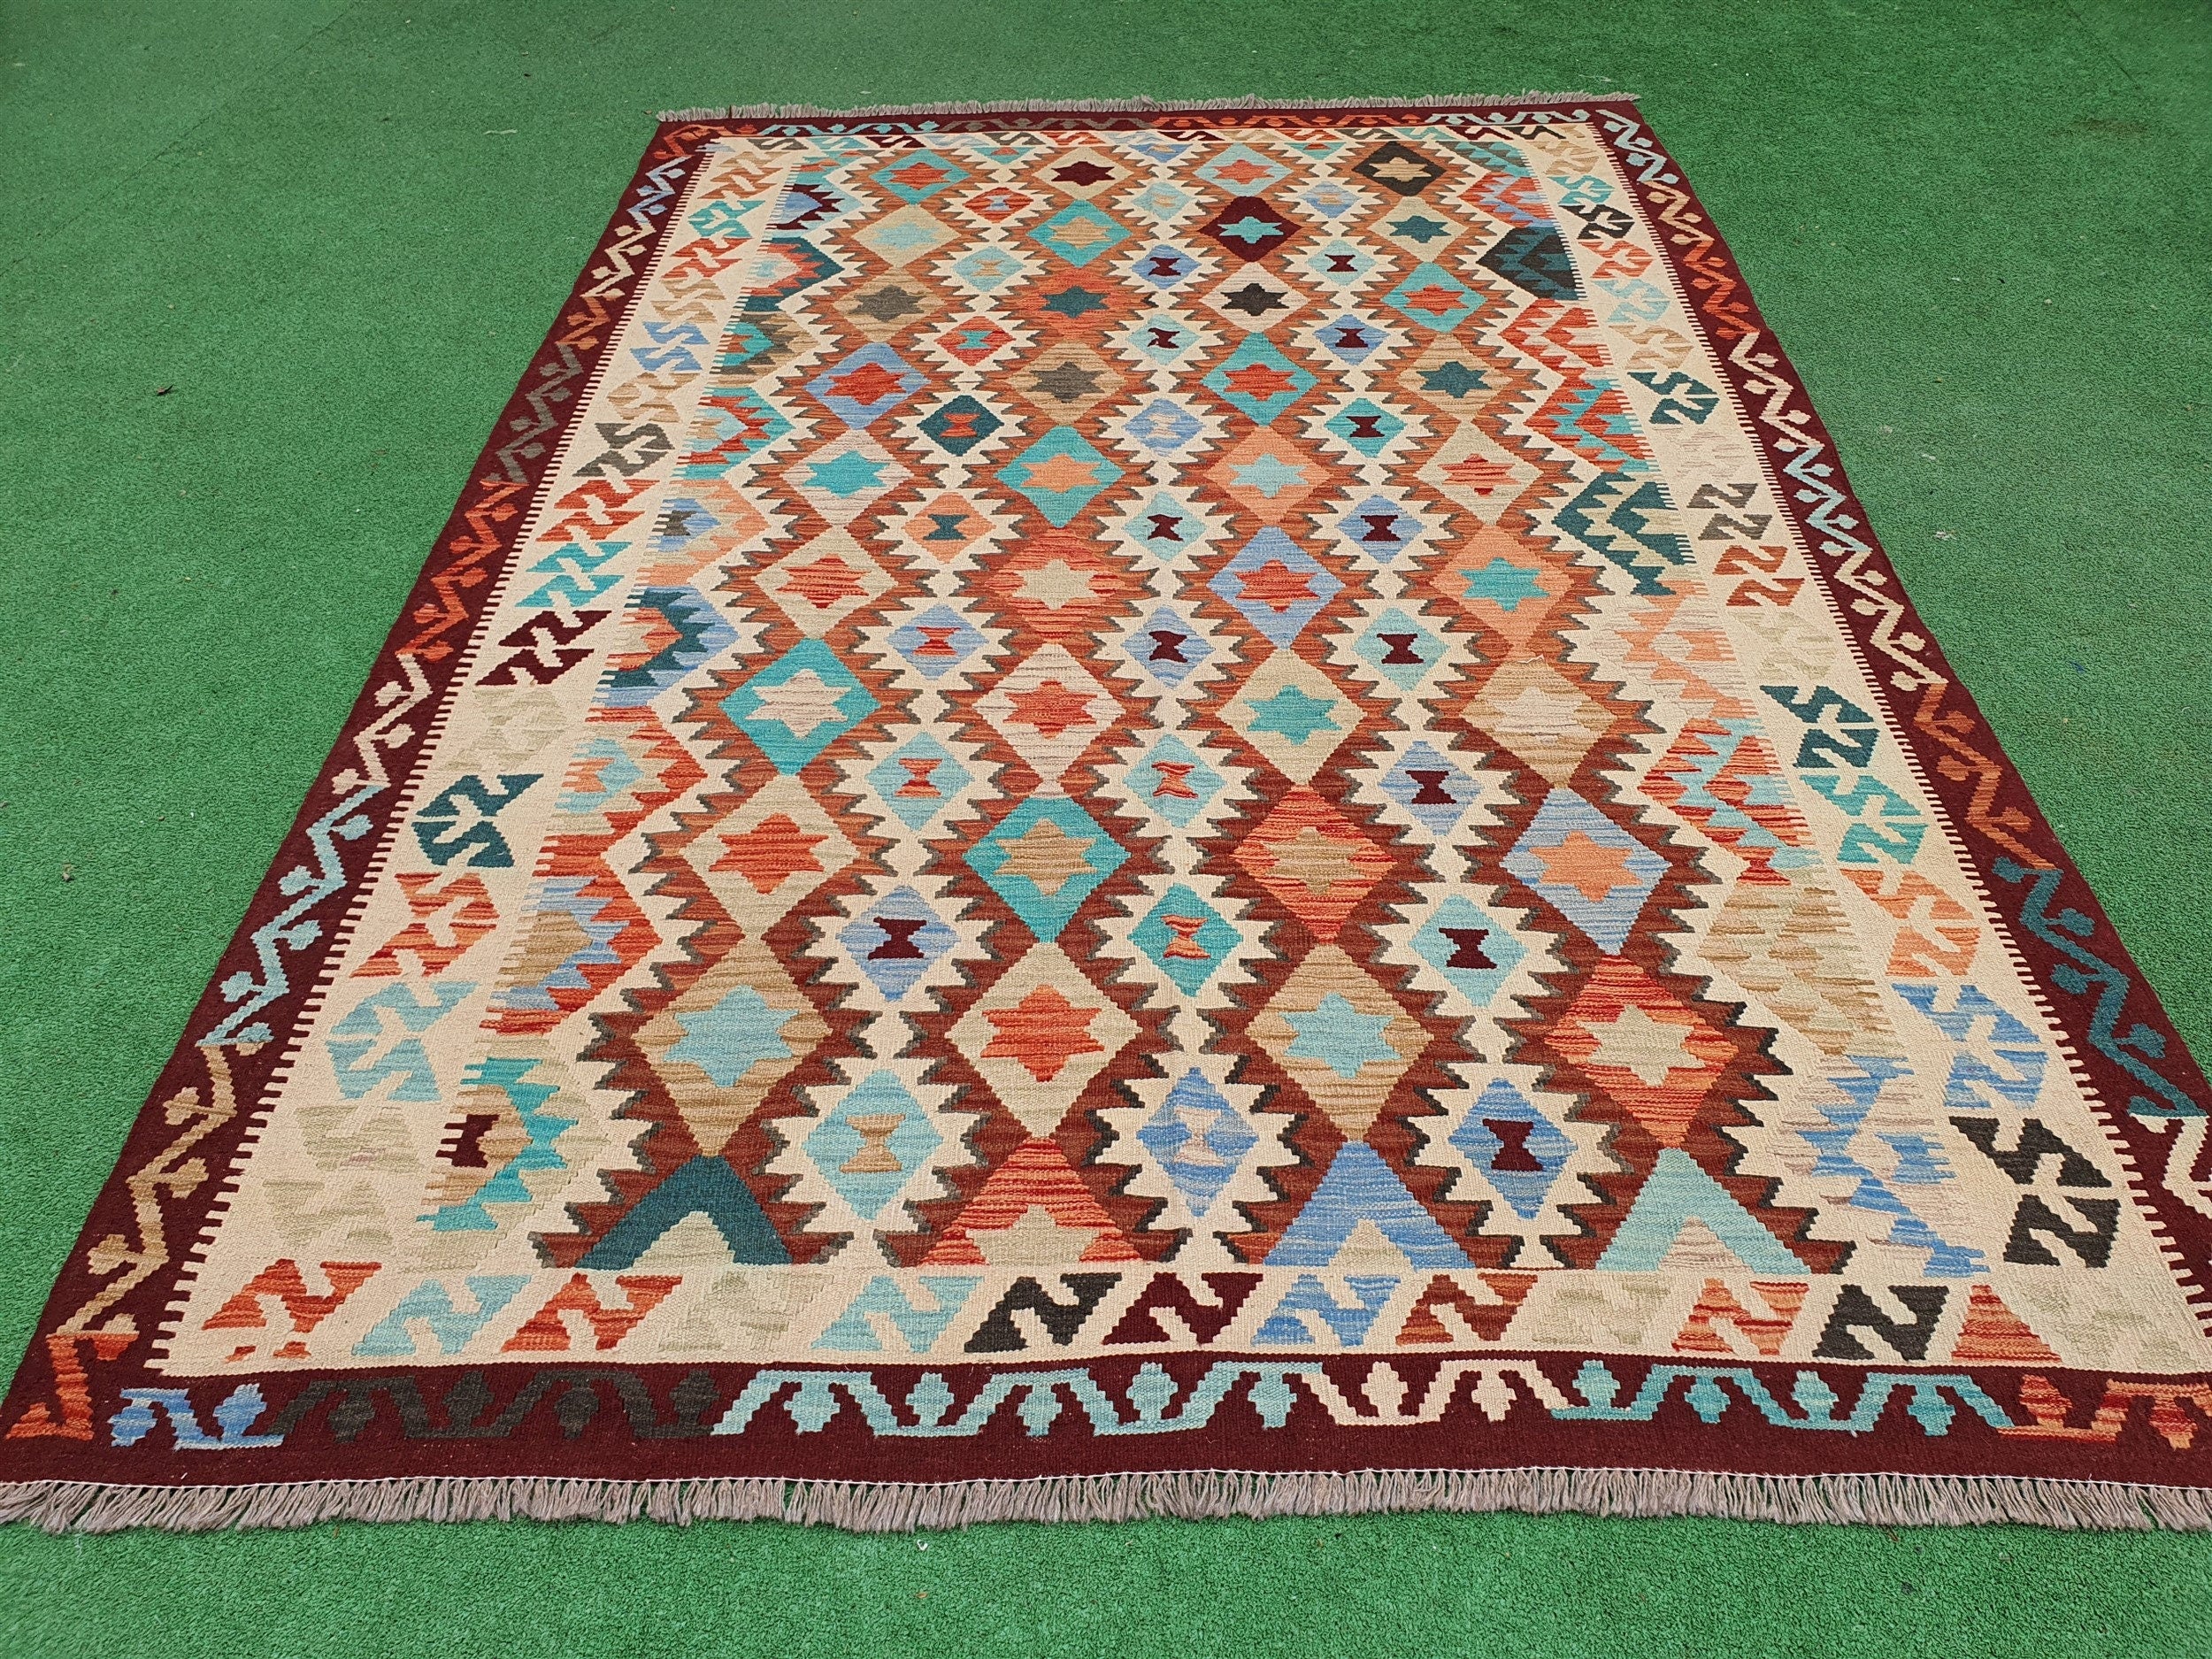 Afghan Kilim Rug, 9 x 6 ft Rust Red, Blue and Off White Turkish Contemporary Kilim